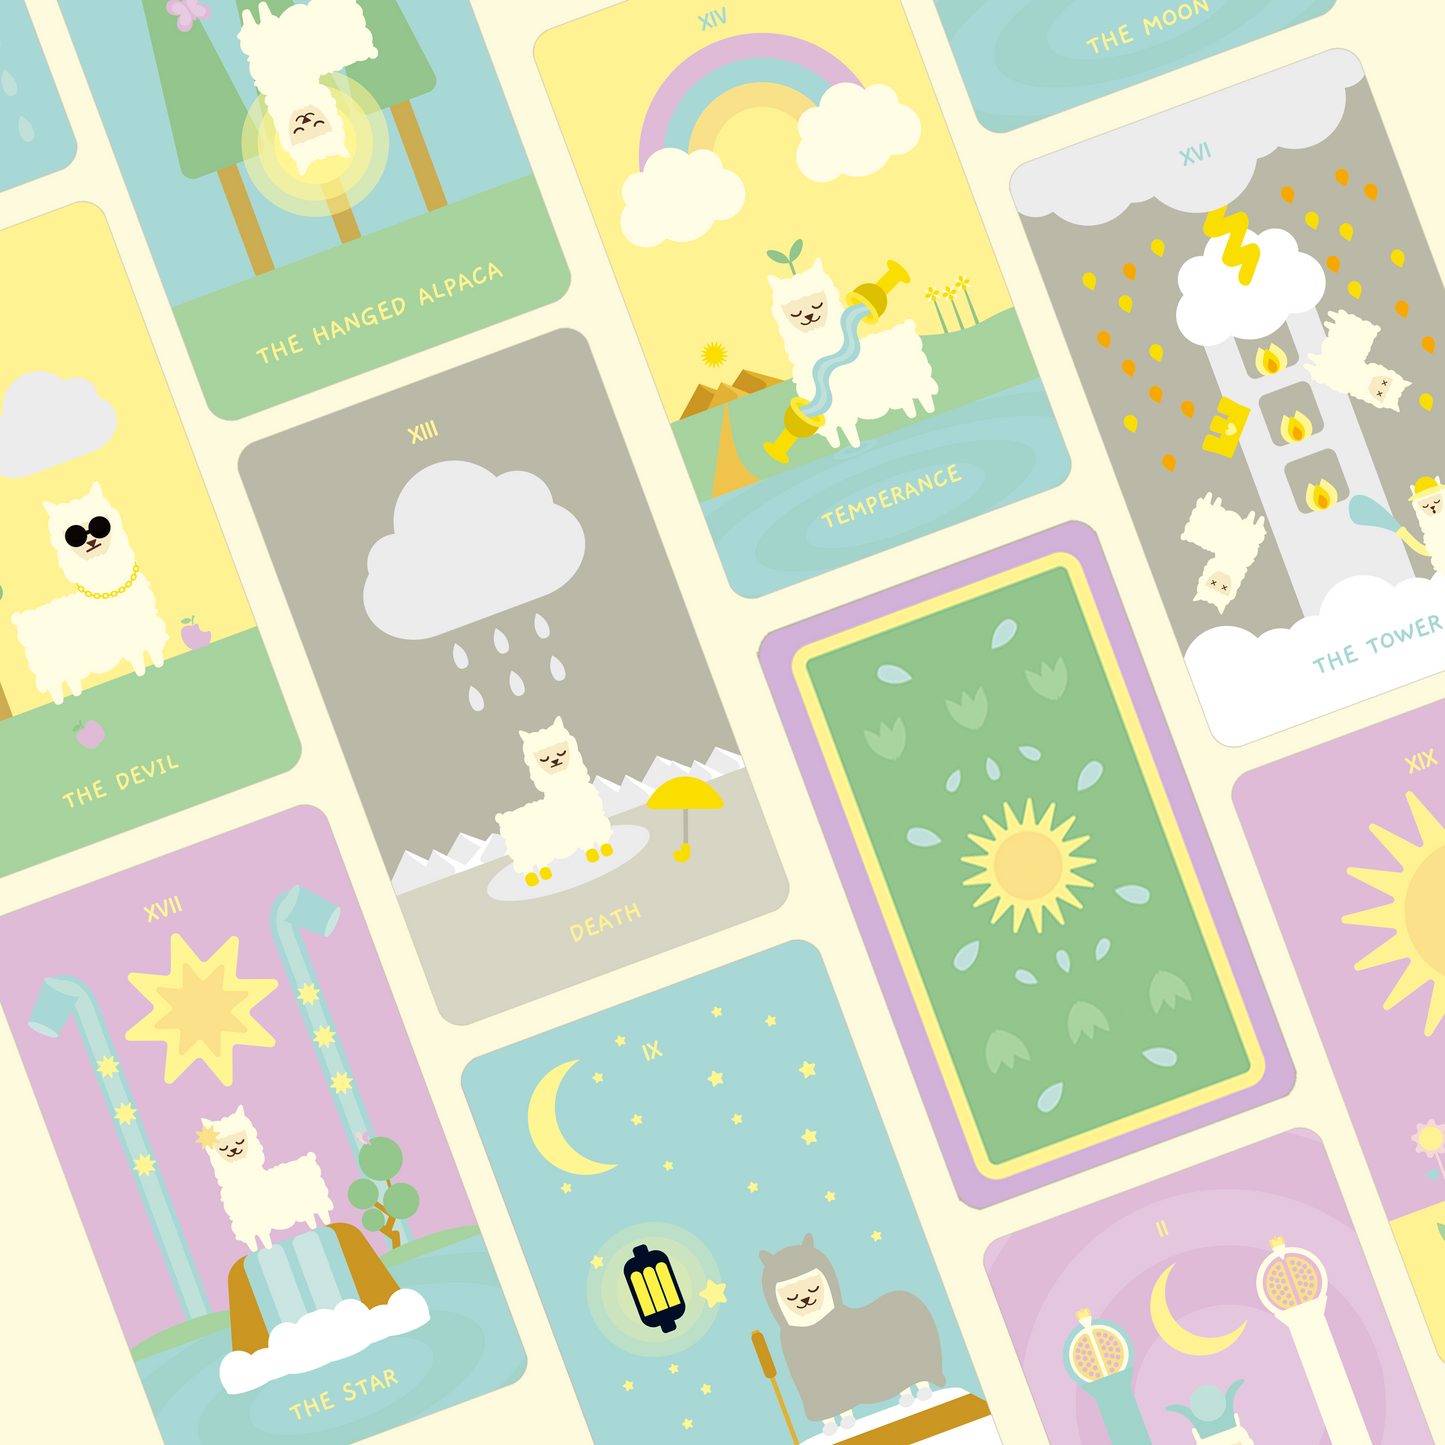 example of alpaca tarot cards, temperance, death card, the star, the tower, hanged man, the devil